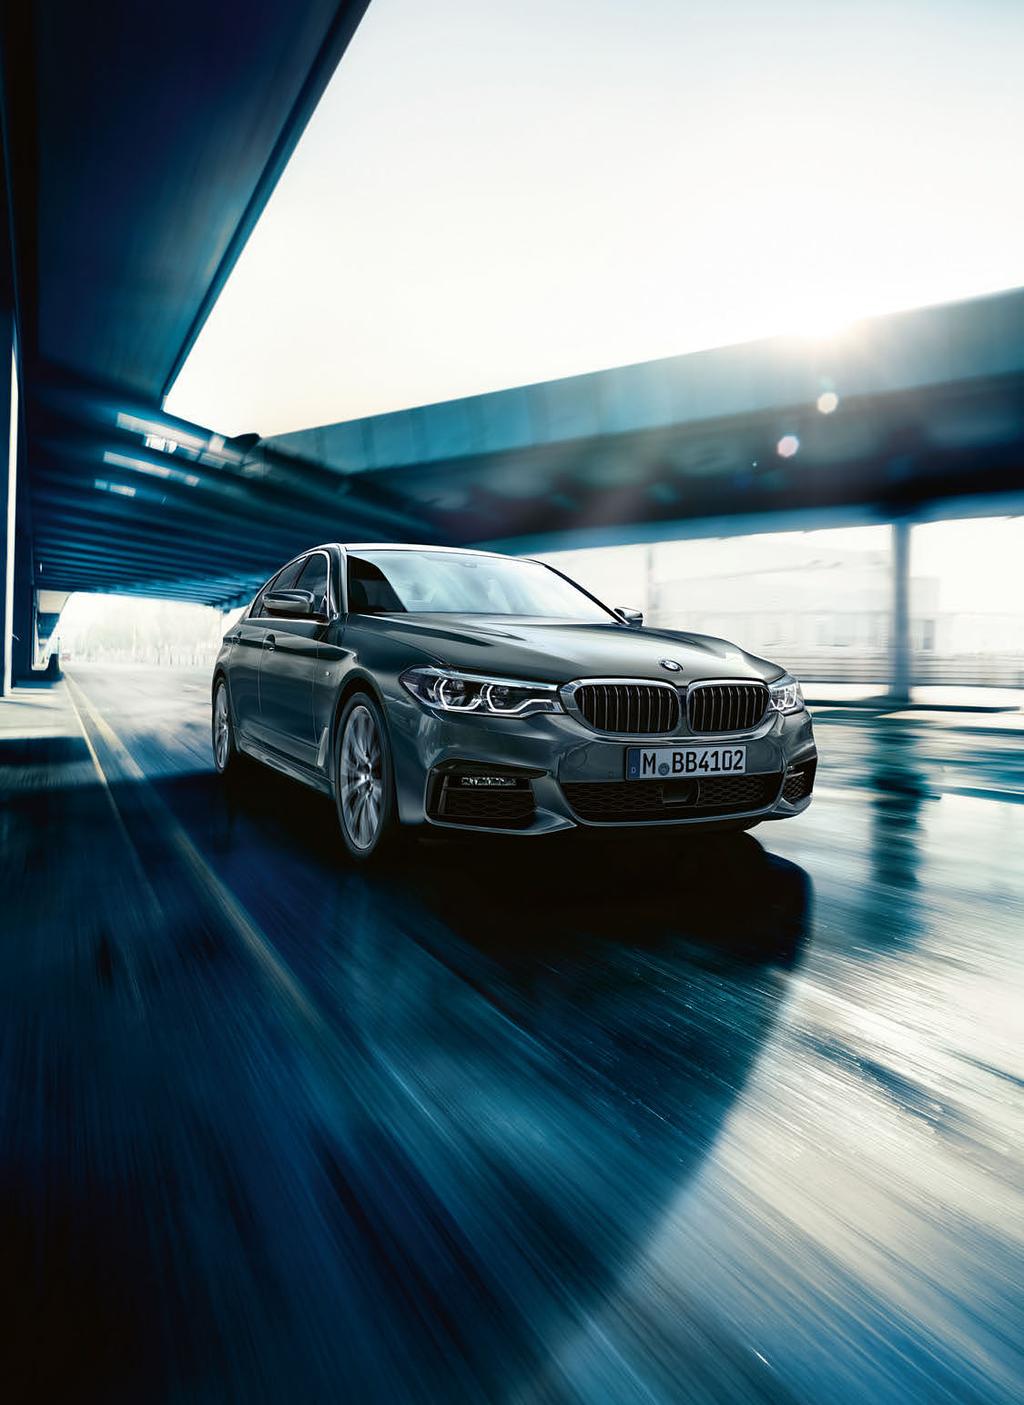 The Ultimate Driving Machine THE BMW 5 SERIES SALOON.